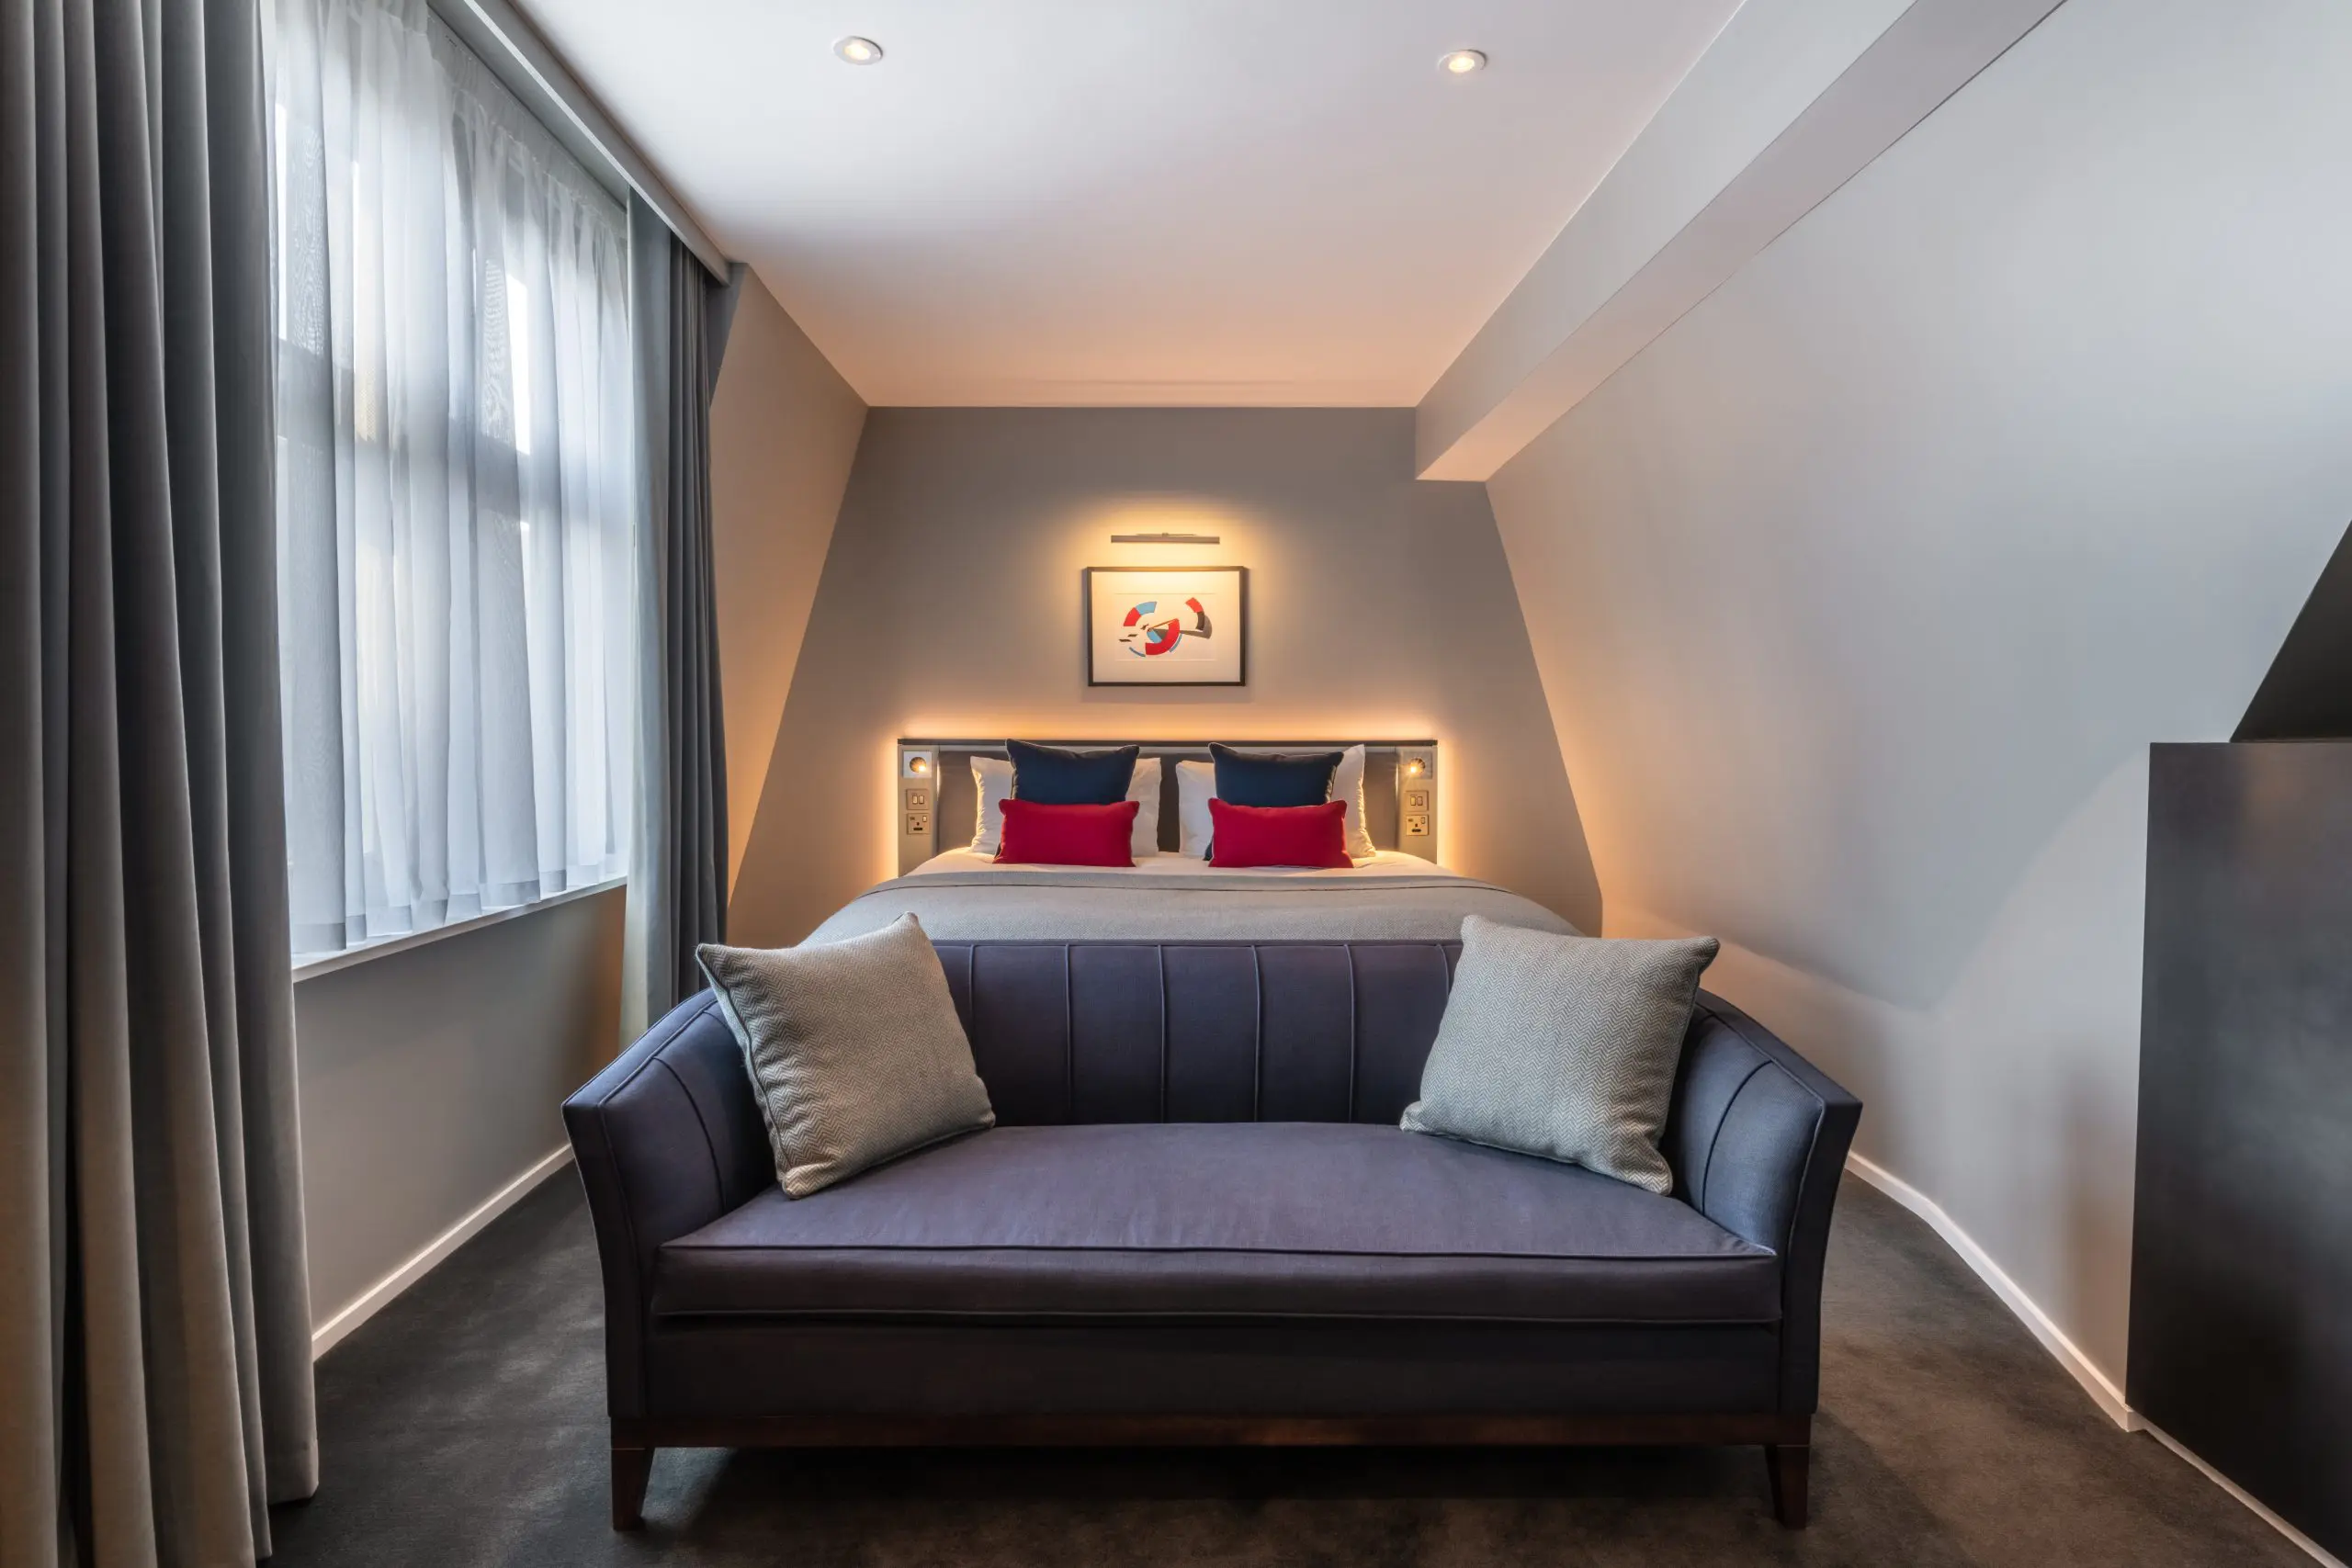 A junior suite with a double bed and sofa, located in Covent Garden.